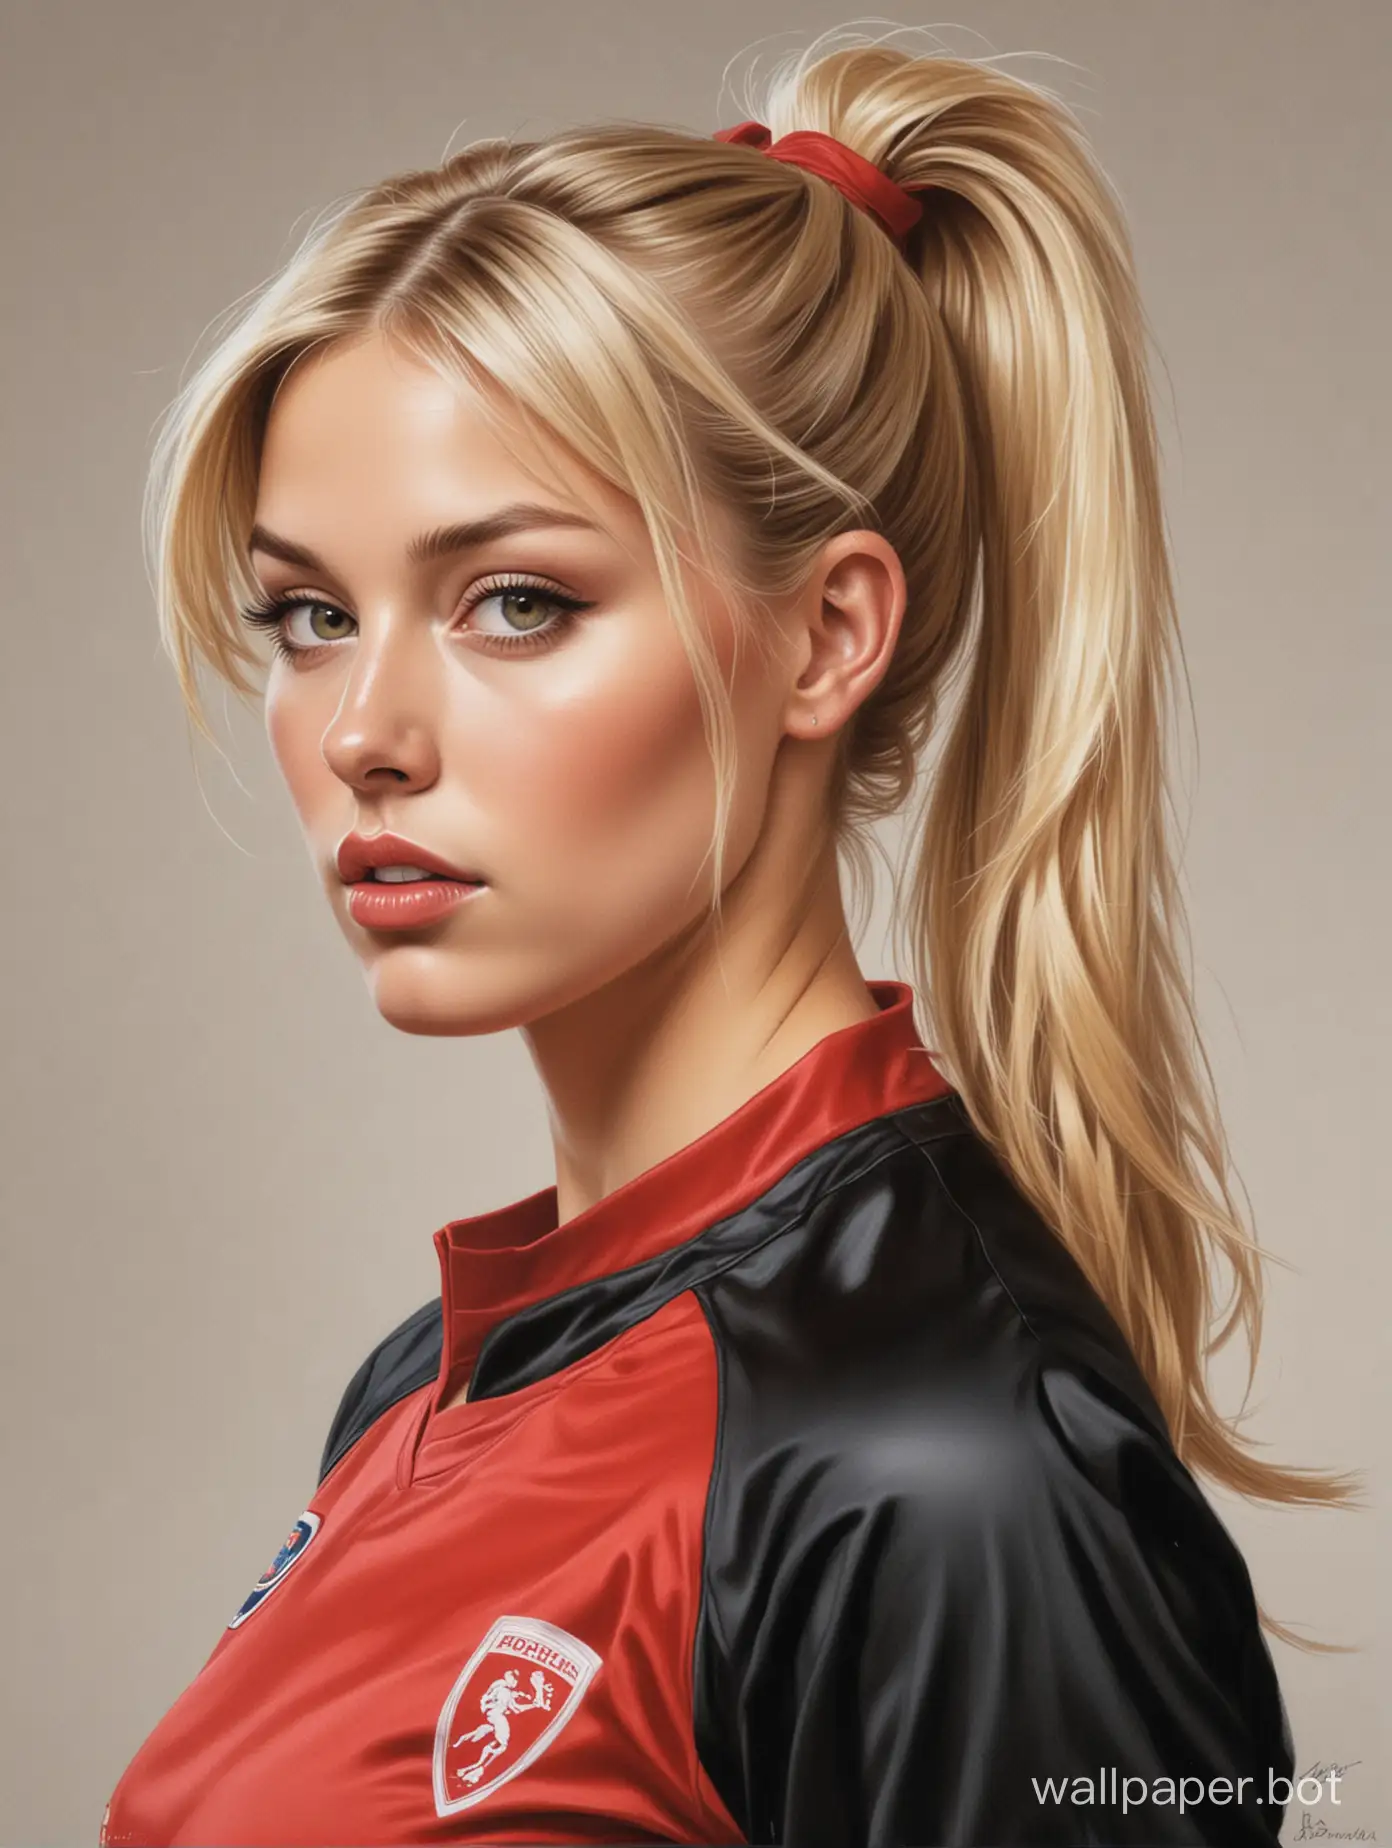 sketch Catherine Forsberg 25 years old light hair with ponytails 6 breast size narrow waist In red-black soccer uniform white background high realism Boris Vallejo style portrait in semi-profile